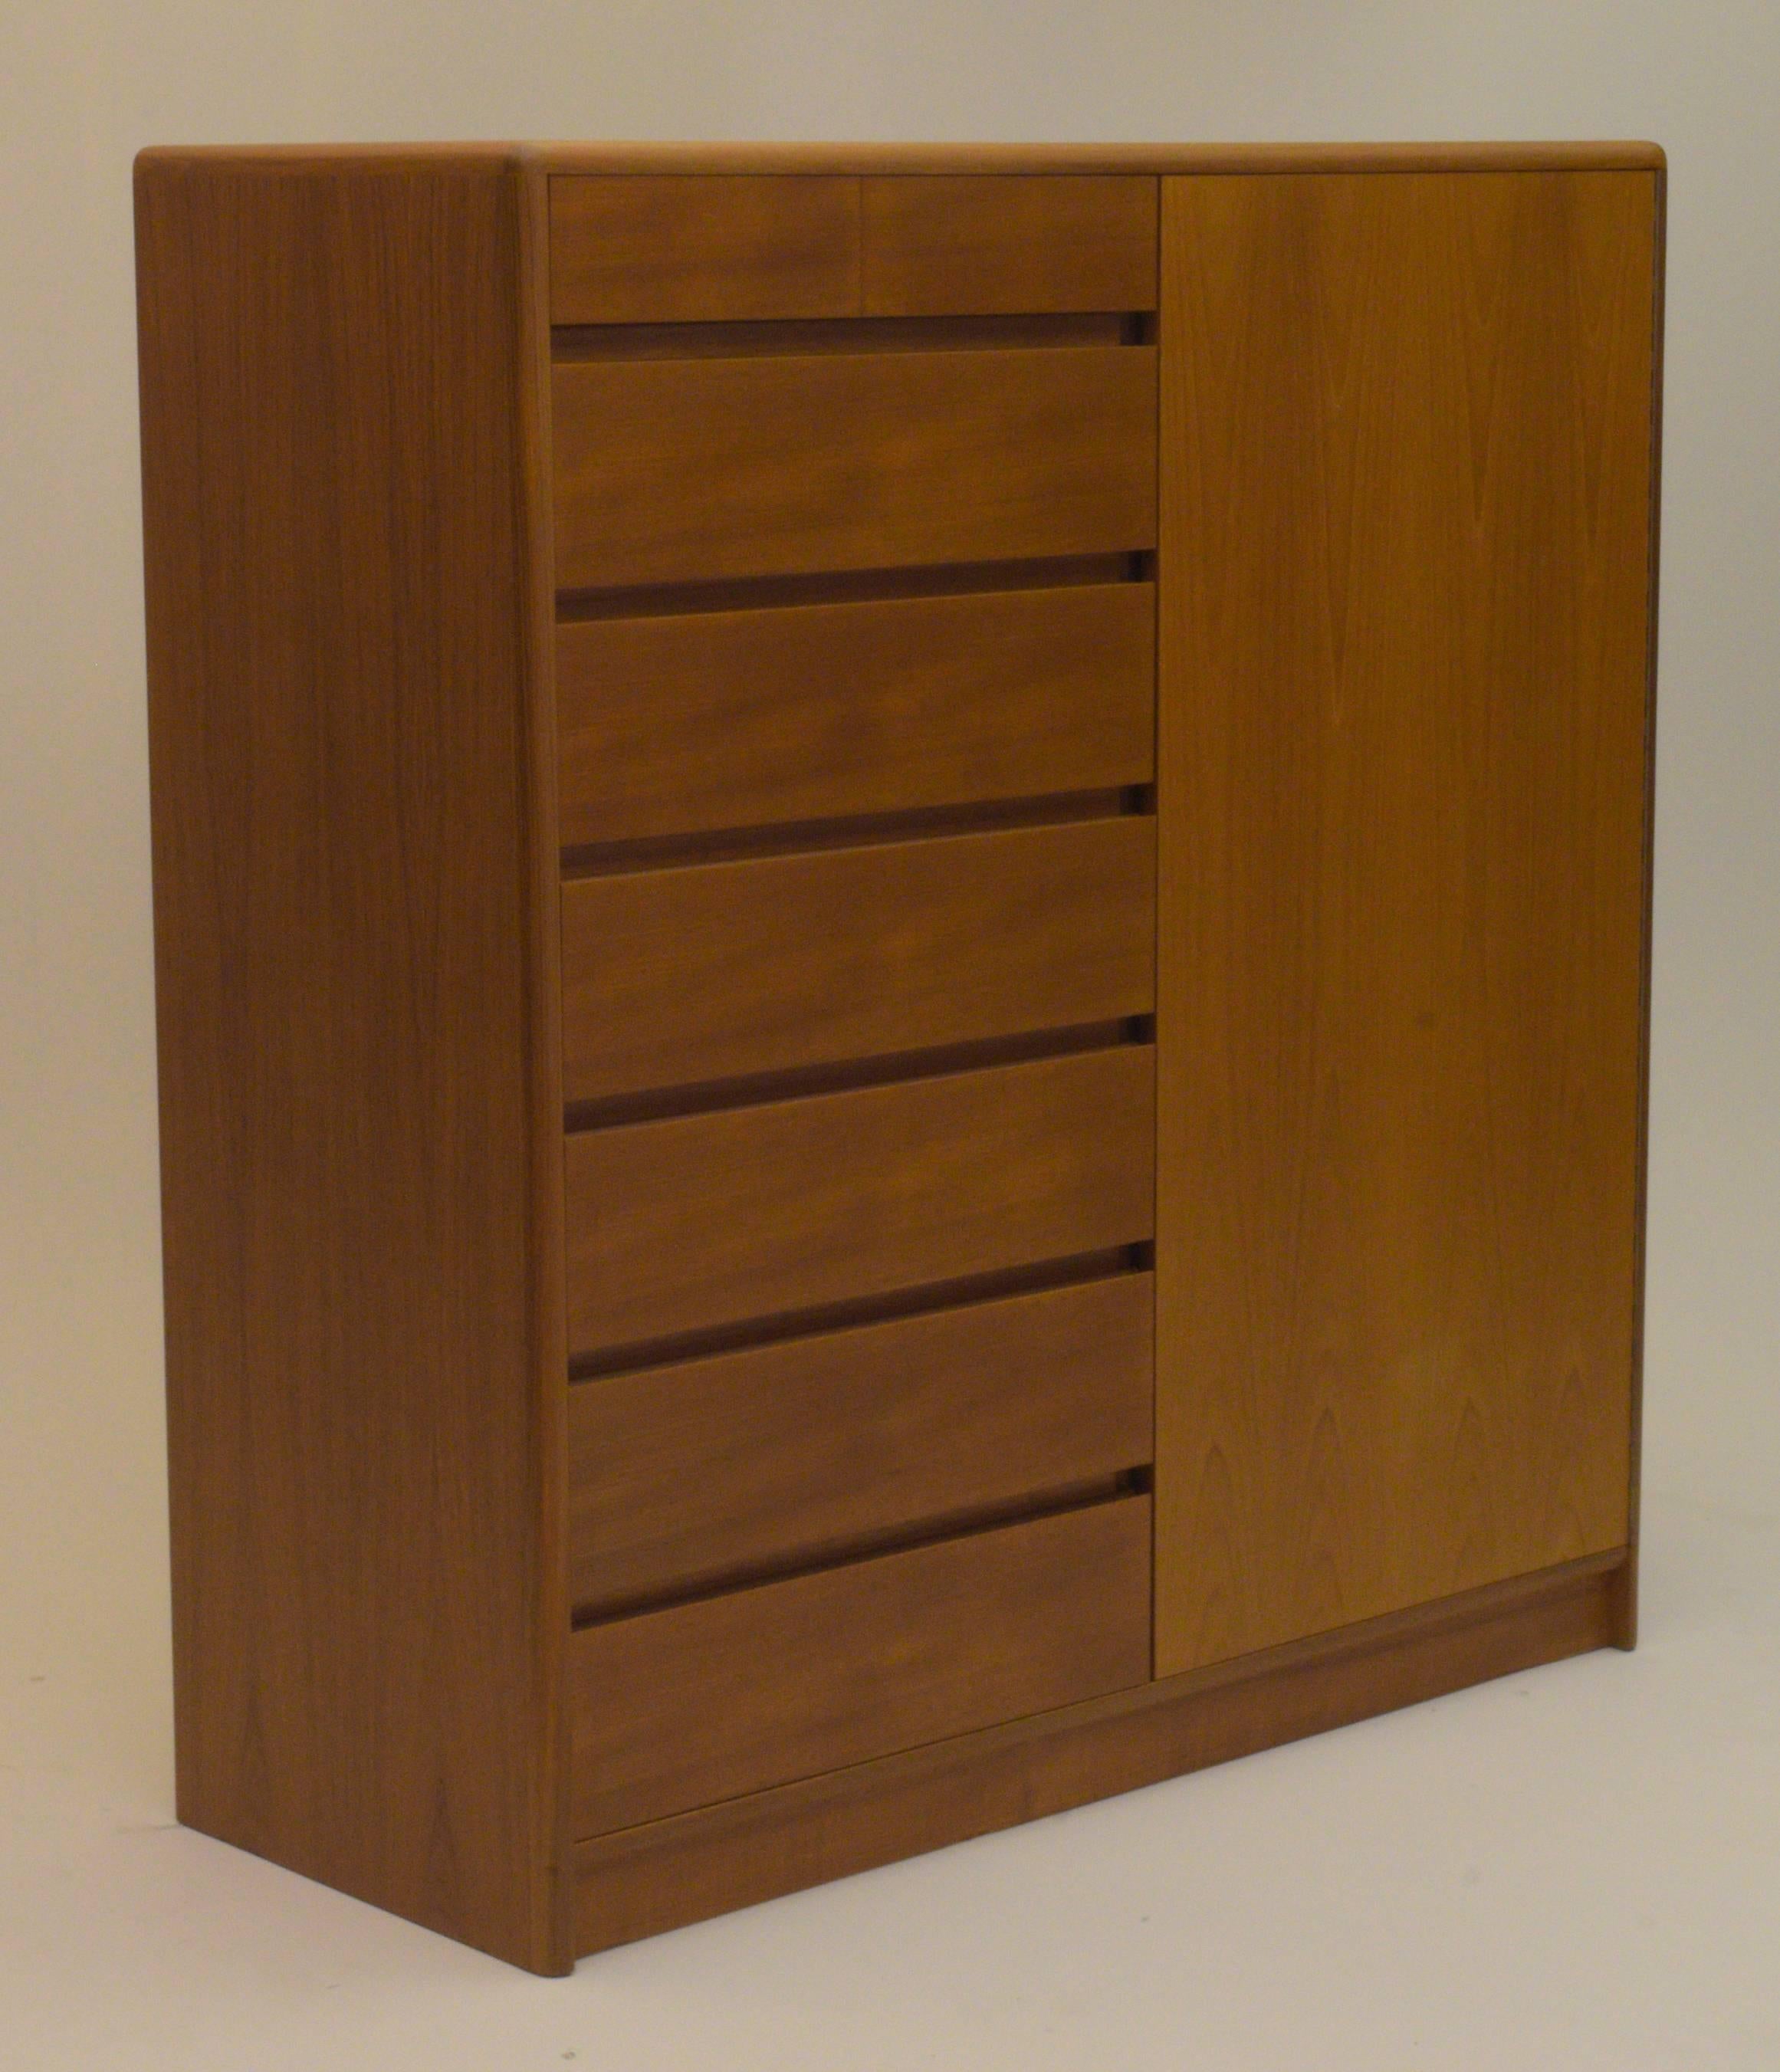 Tall modernist Danish modern design for your bedroom. Armoire. Produced in the 1960s Copenhagen, Denmark. It is exceptionally well-designed and built.

Matching low boy dresser chest available in separate listing also.

Warm teakwood and a